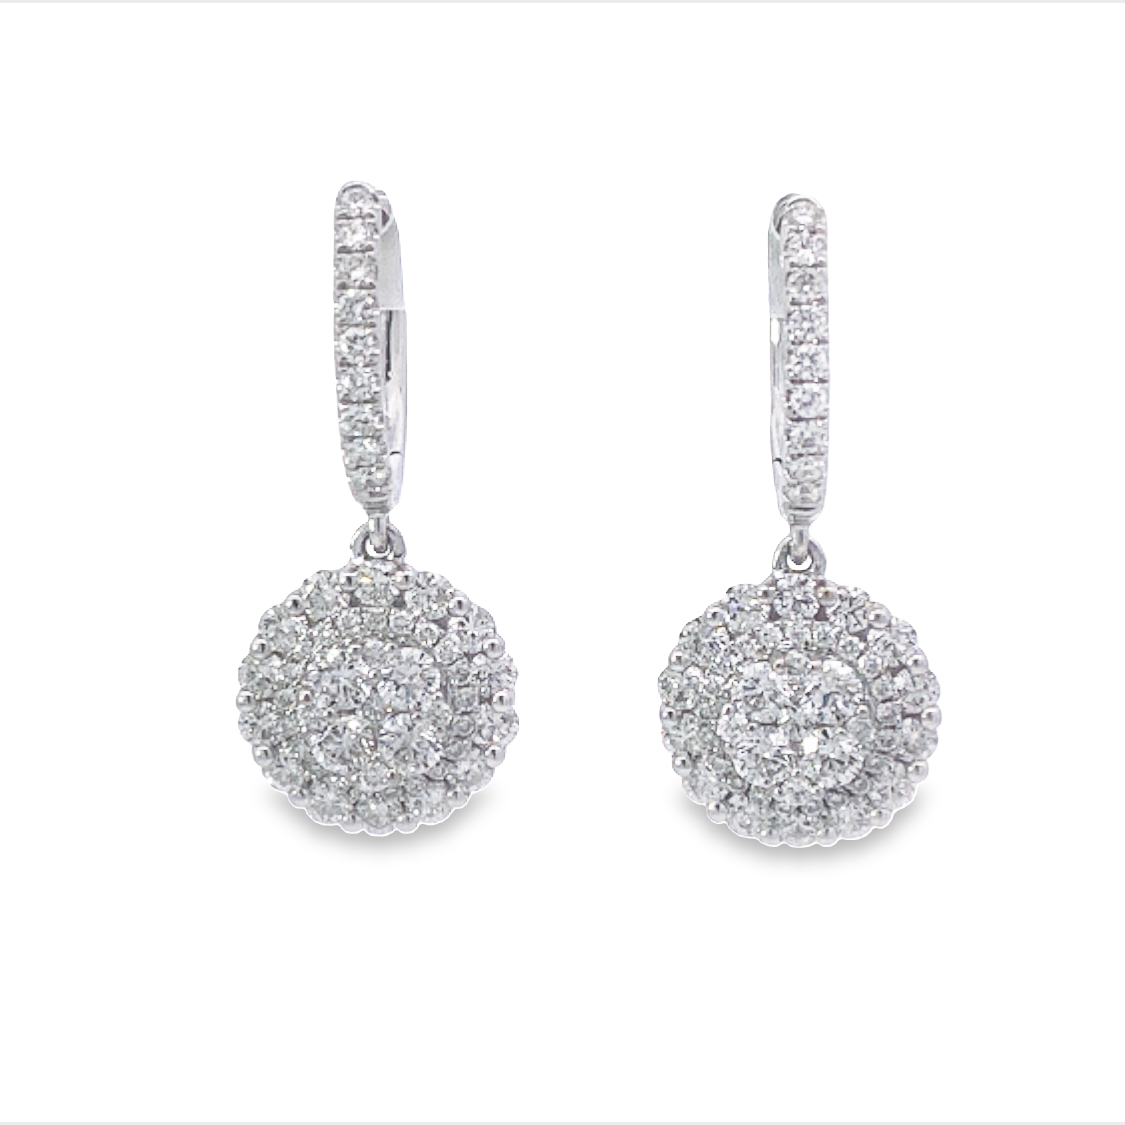 18K White Gold Earrings with Round Diamonds 1.88 Tcw